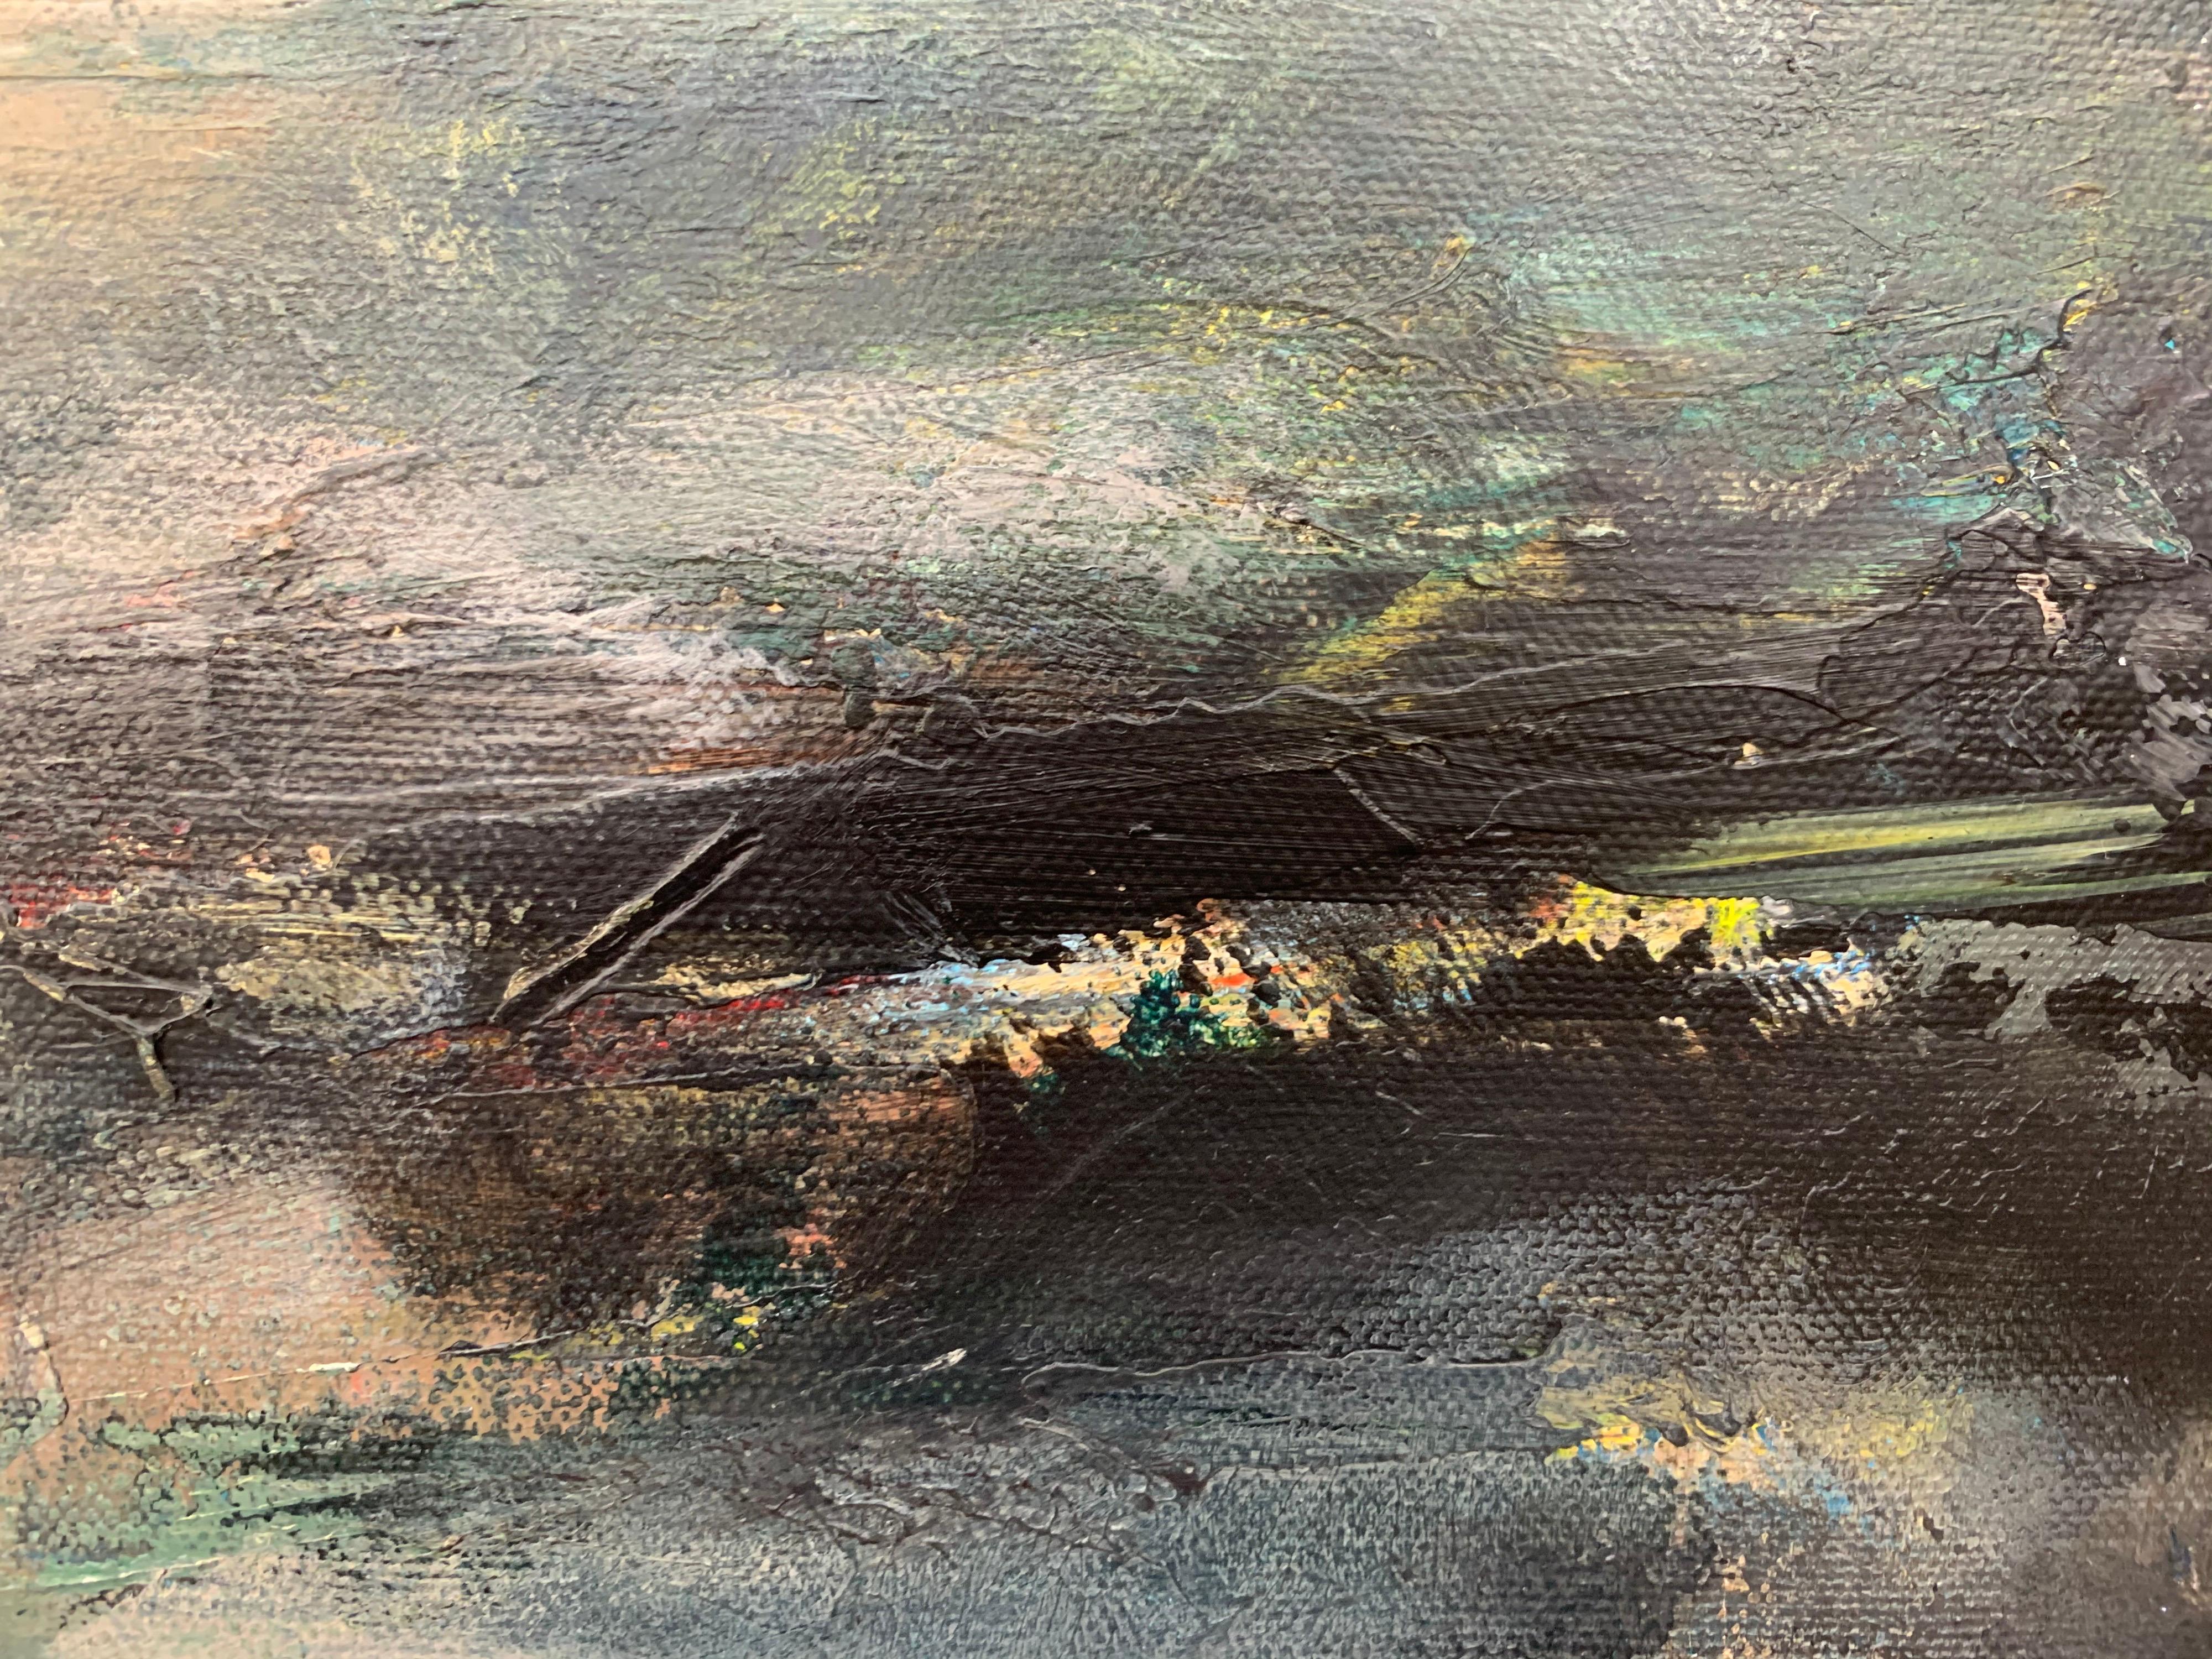 Dark Atmospheric Abstract Landscape Painting by Contemporary British Artist For Sale 12